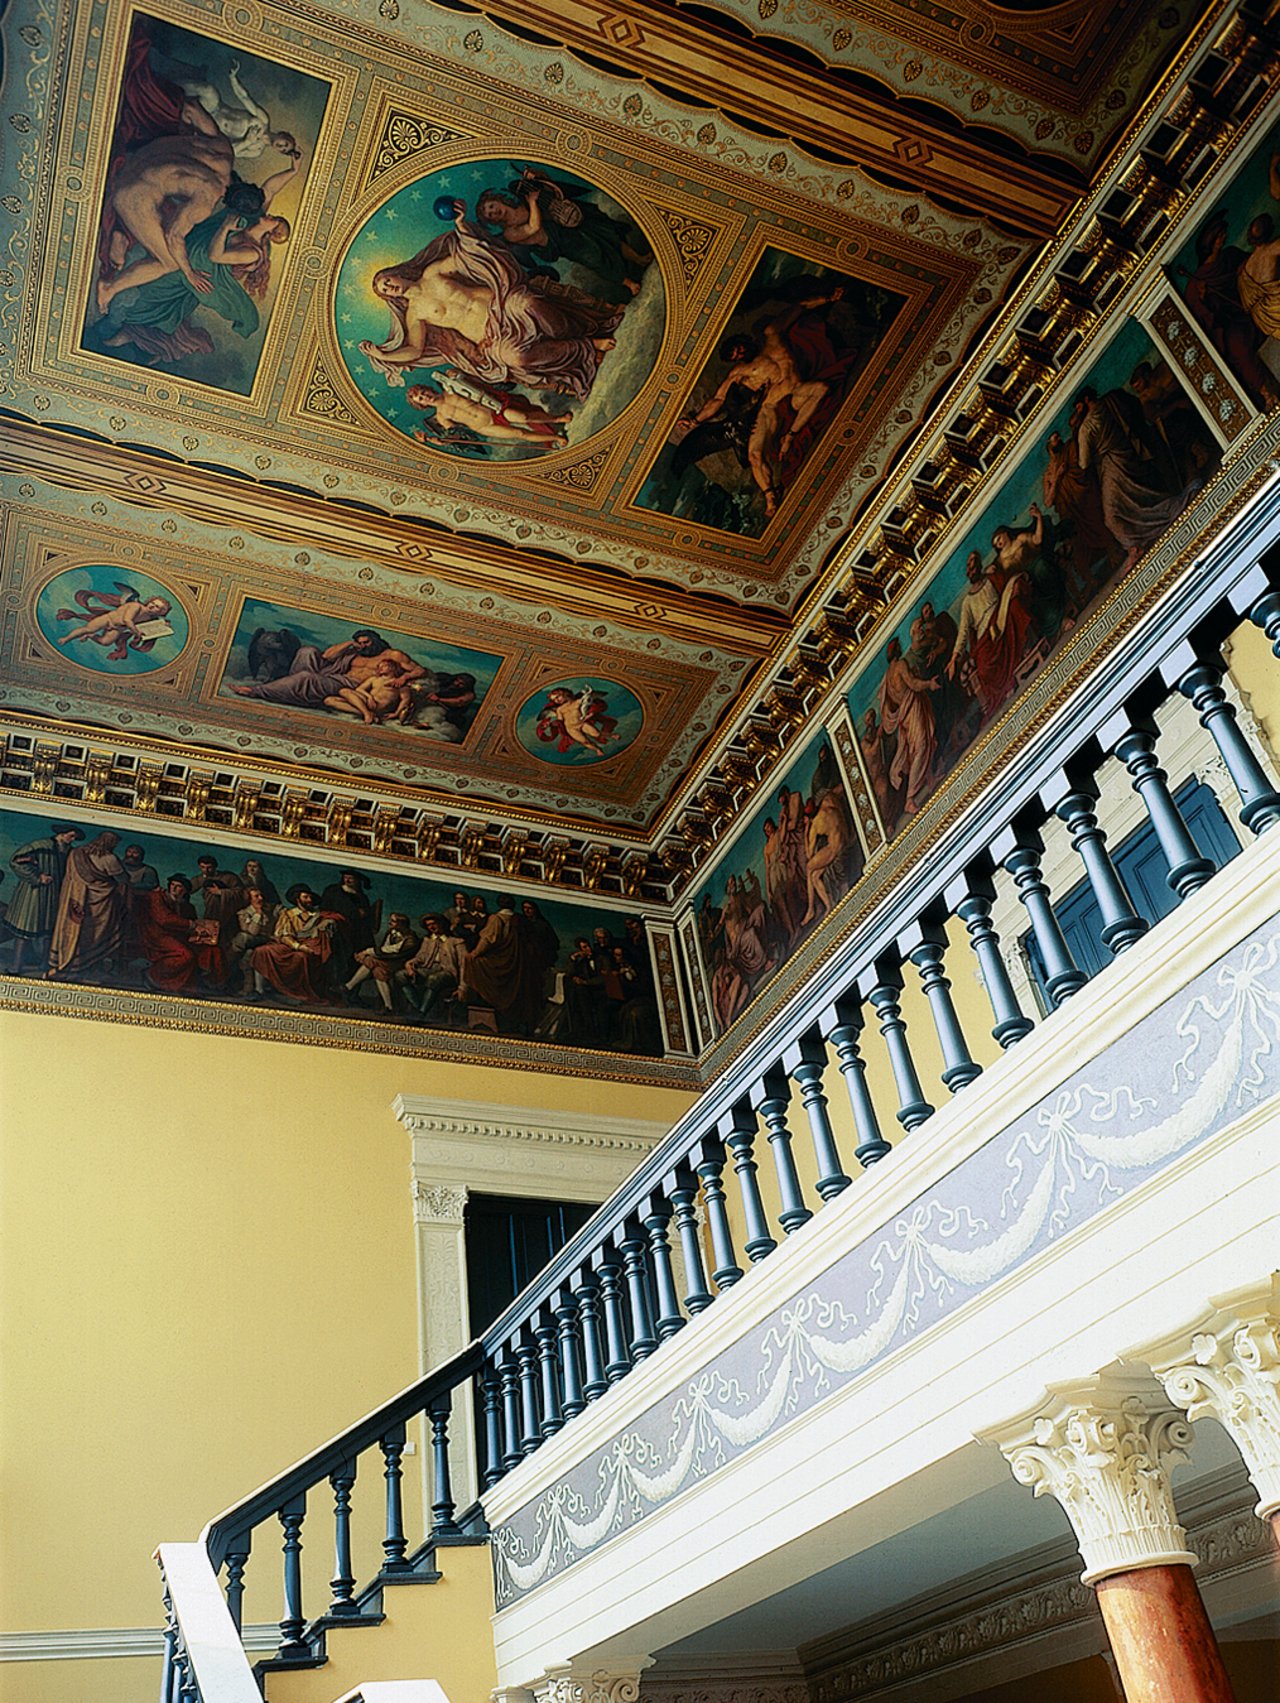 Photo of the staircase in the Augusteum with a view of the ceiling paintings by Christian Griepenkerl.